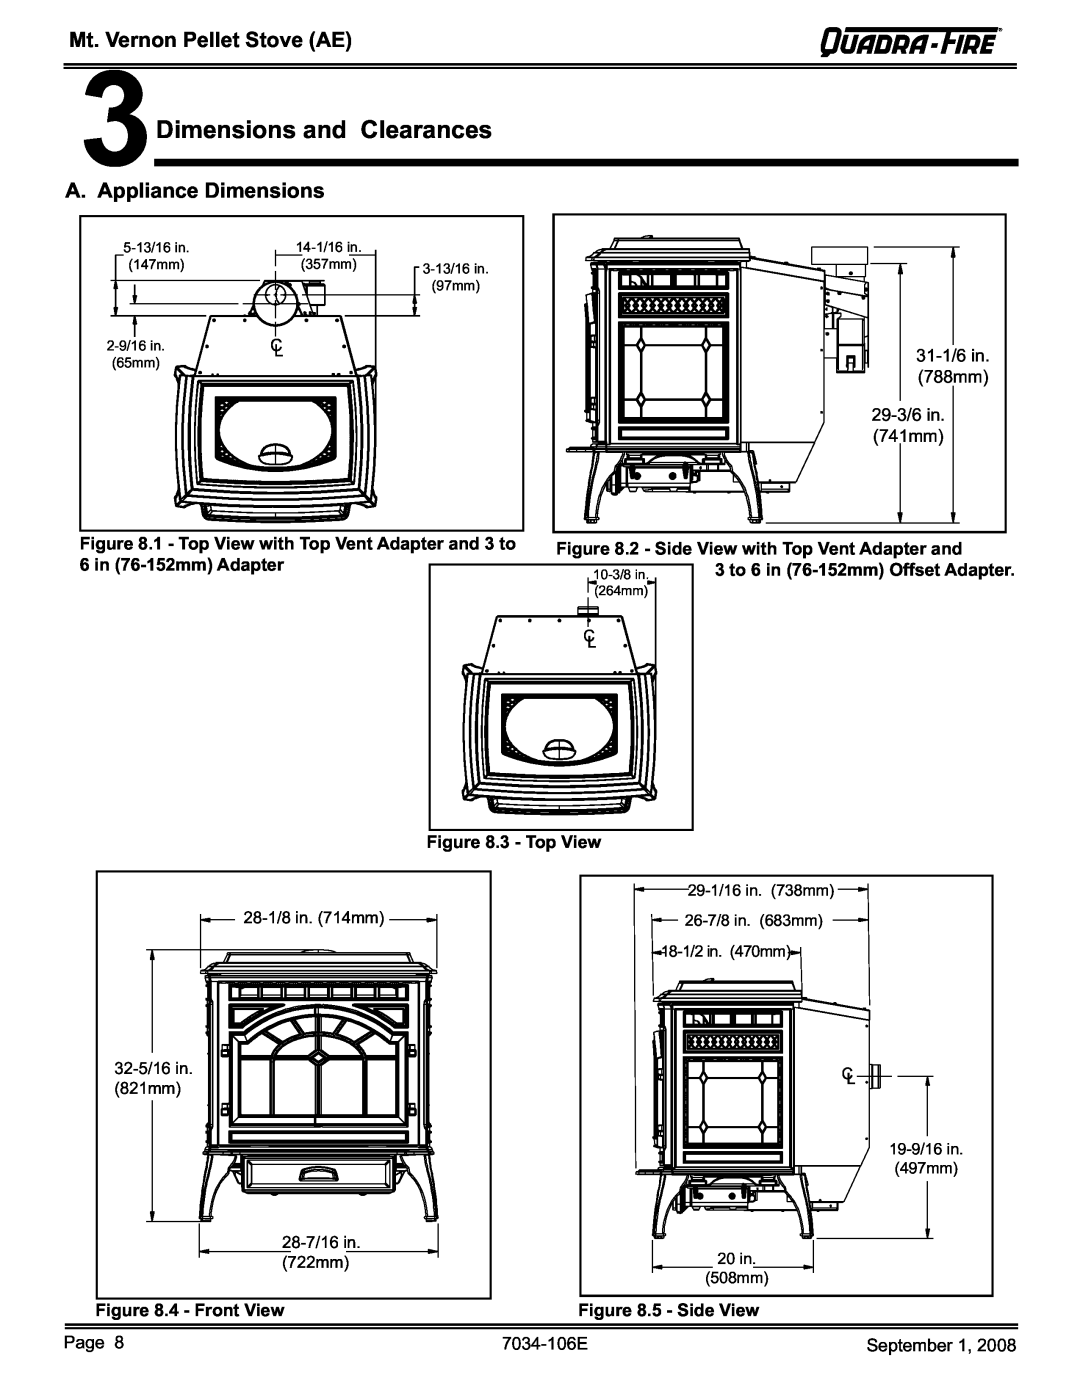 Quadra-Fire MTVERNON-AE-PMH owner manual 3Dimensions and Clearances, A. Appliance Dimensions, Mt. Vernon Pellet Stove AE 